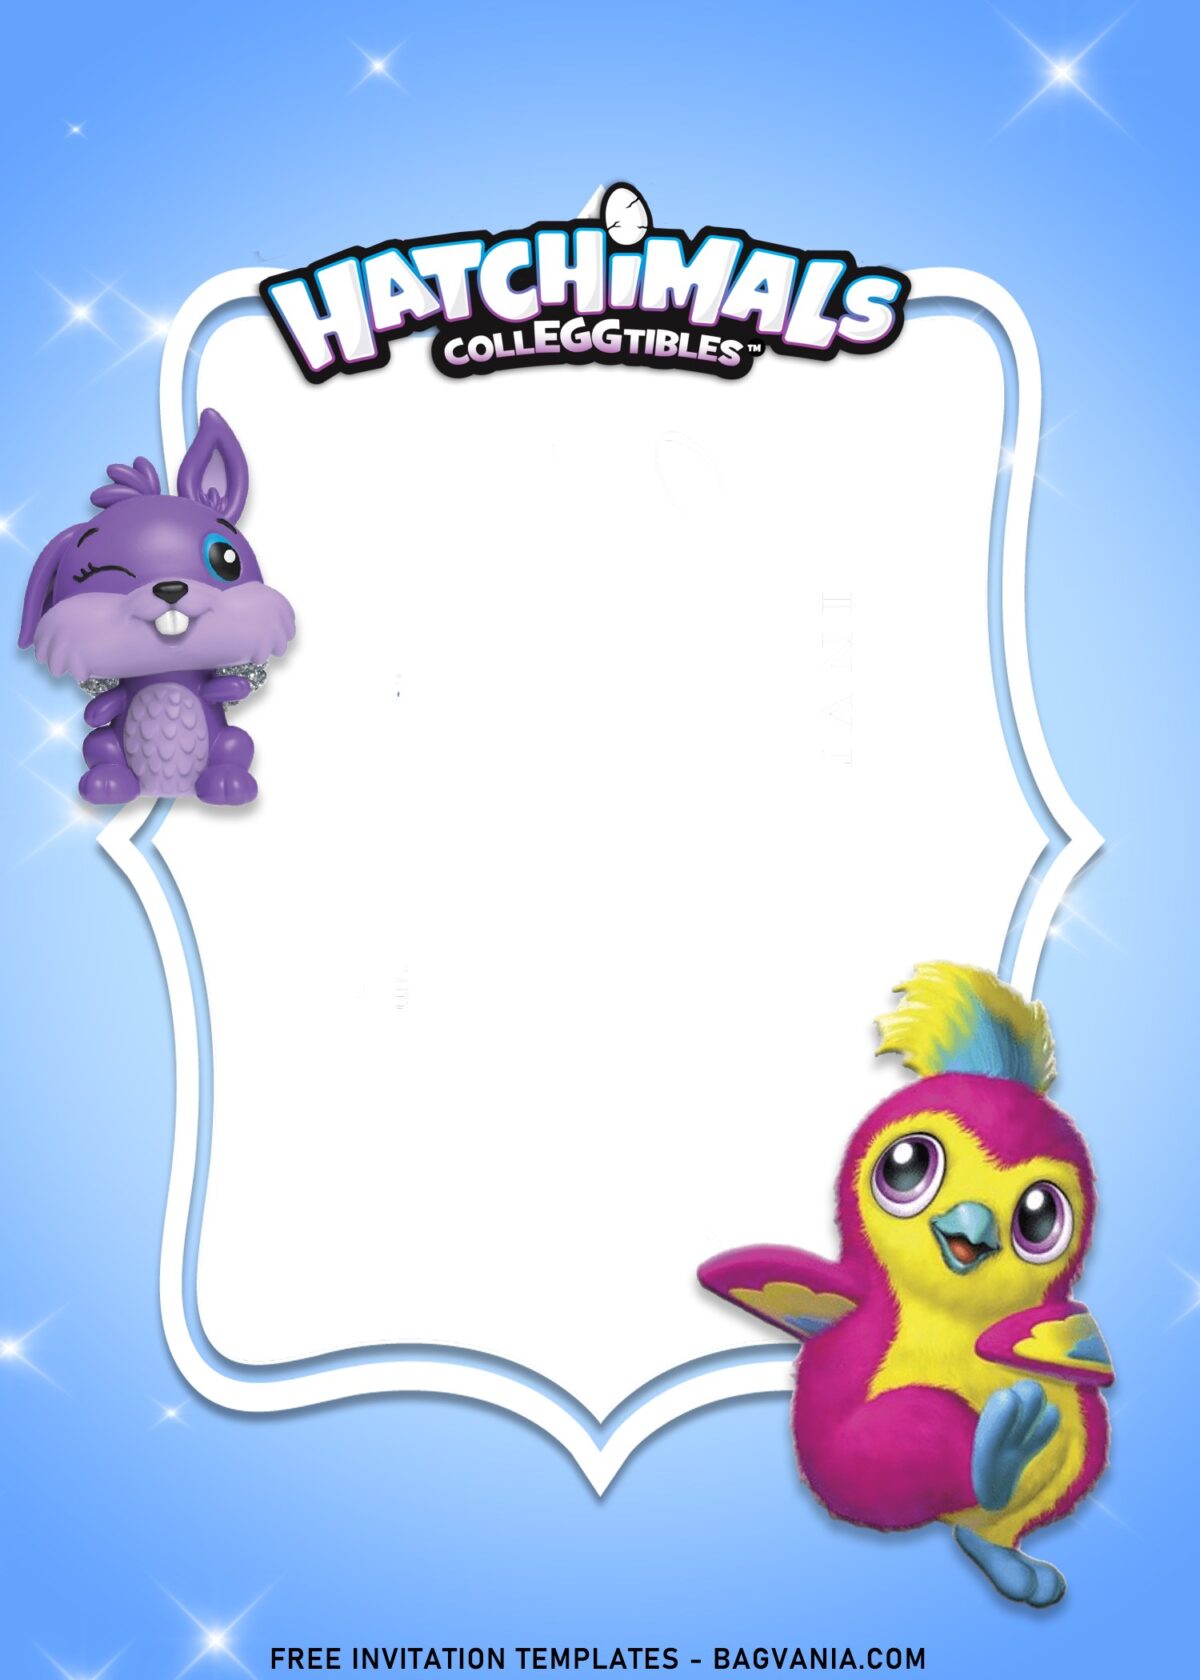 7+ Twinkly Cute Hatchimals Birthday Invitation Templates with adorable Rabbit Hatchimals